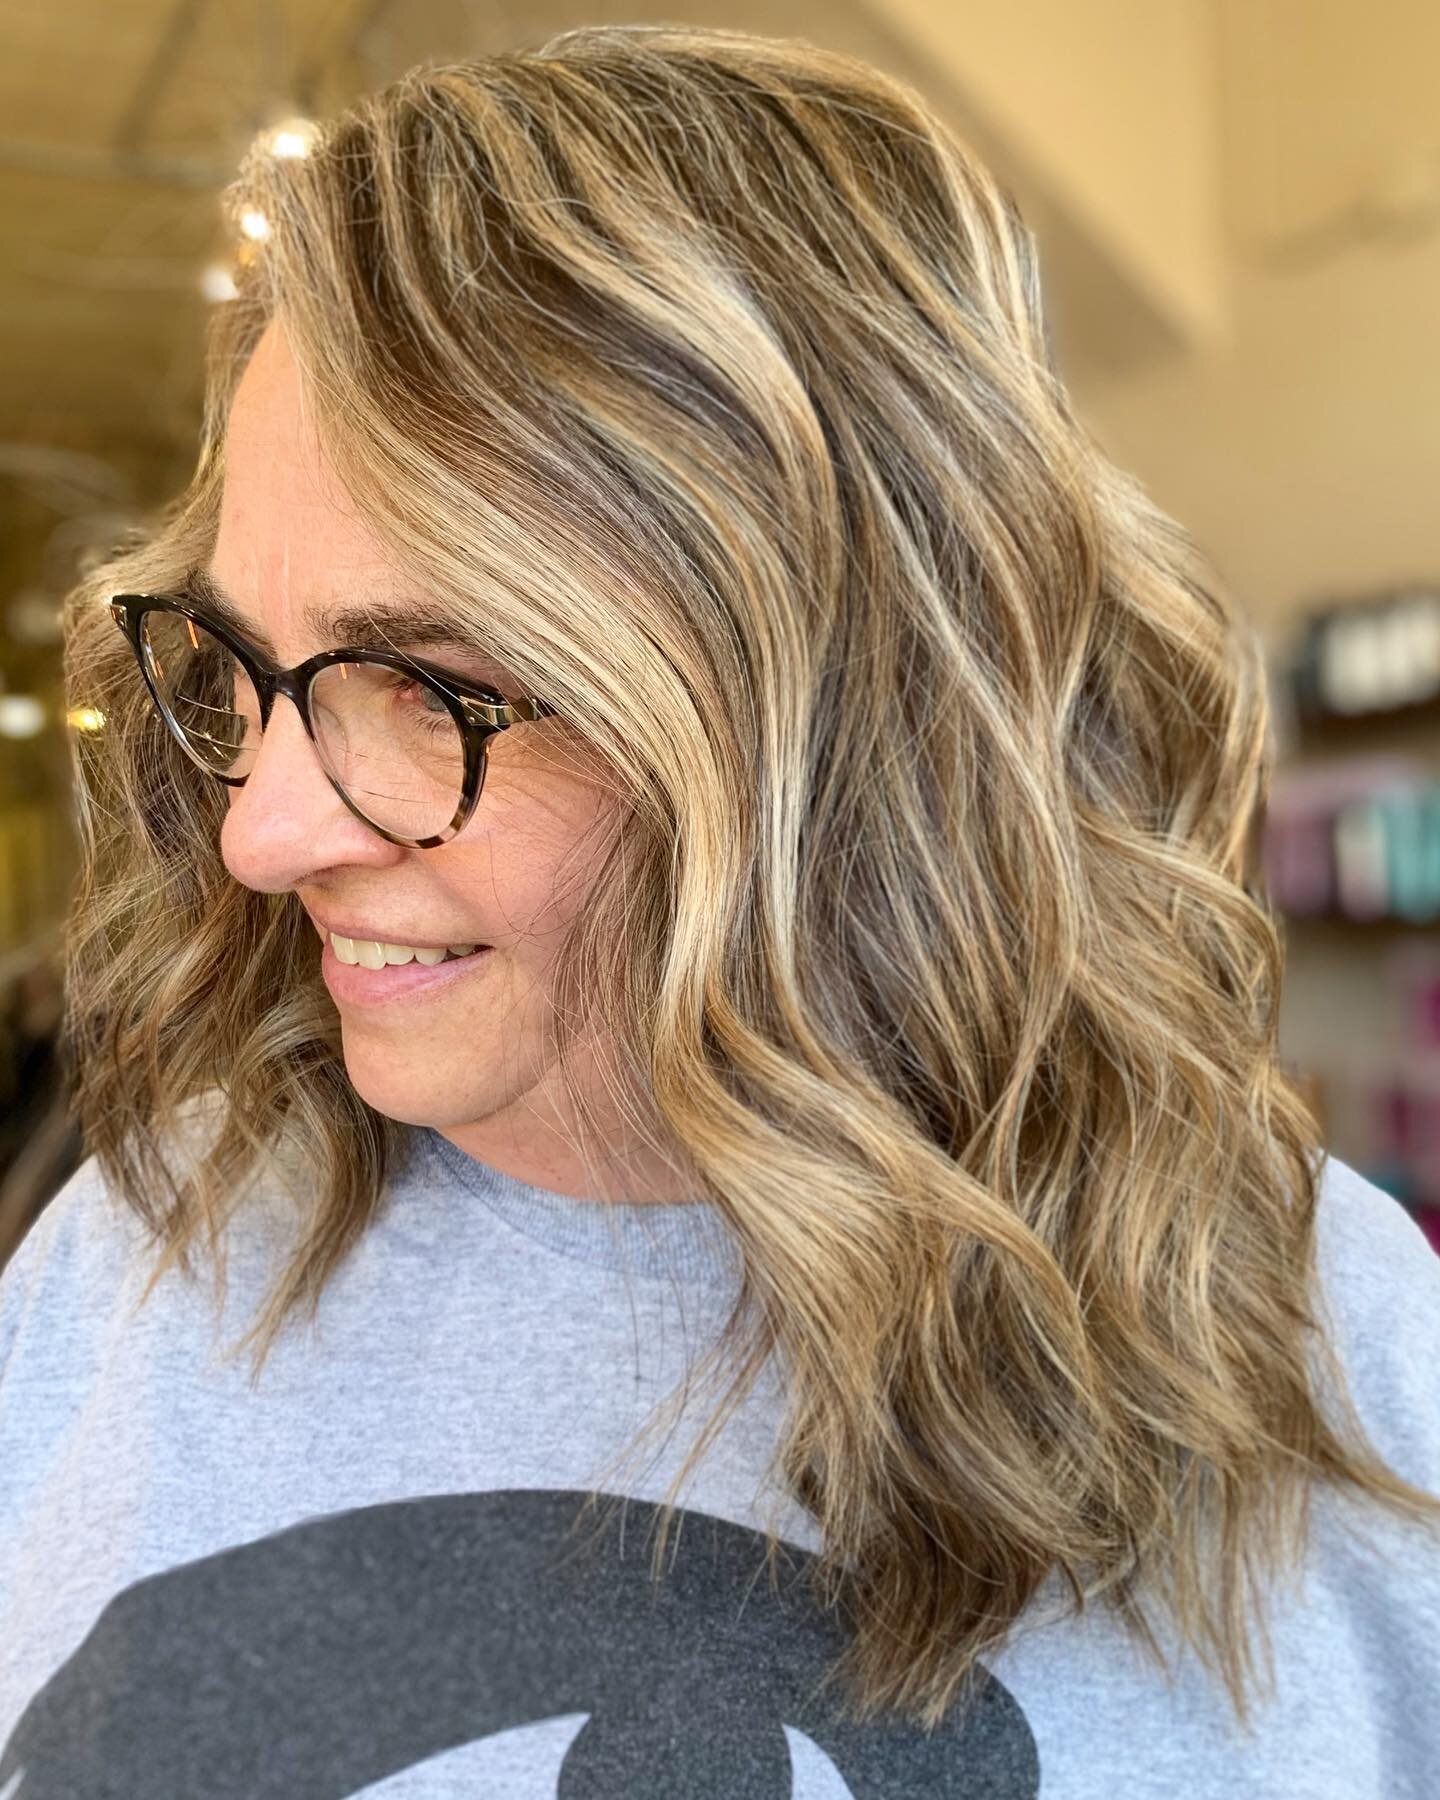 I have some gorgeous clients with gorgeous hair 🤩 we do foils to blend her gray strands in without covering them up! The result is a beautiful blend of warm and cool tones 🙌🏻